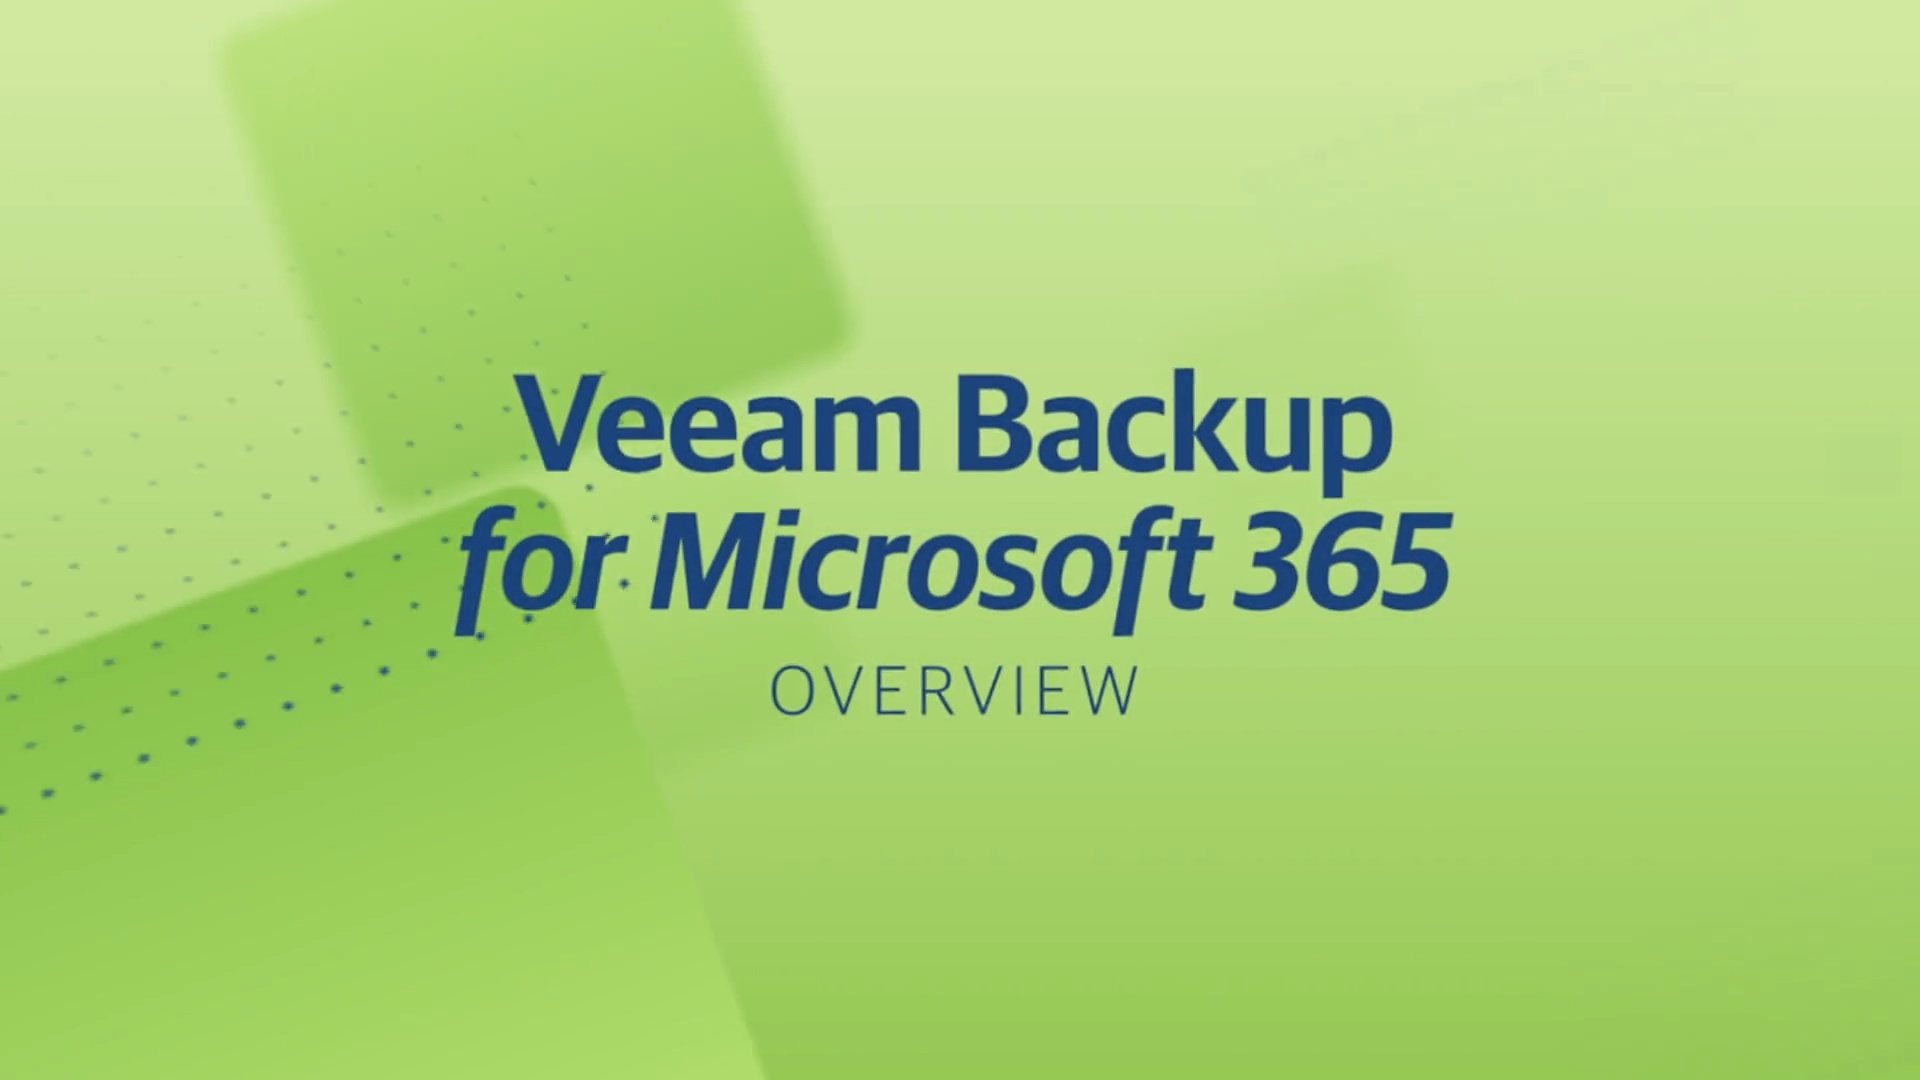 Backup as a Service for Microsoft 365